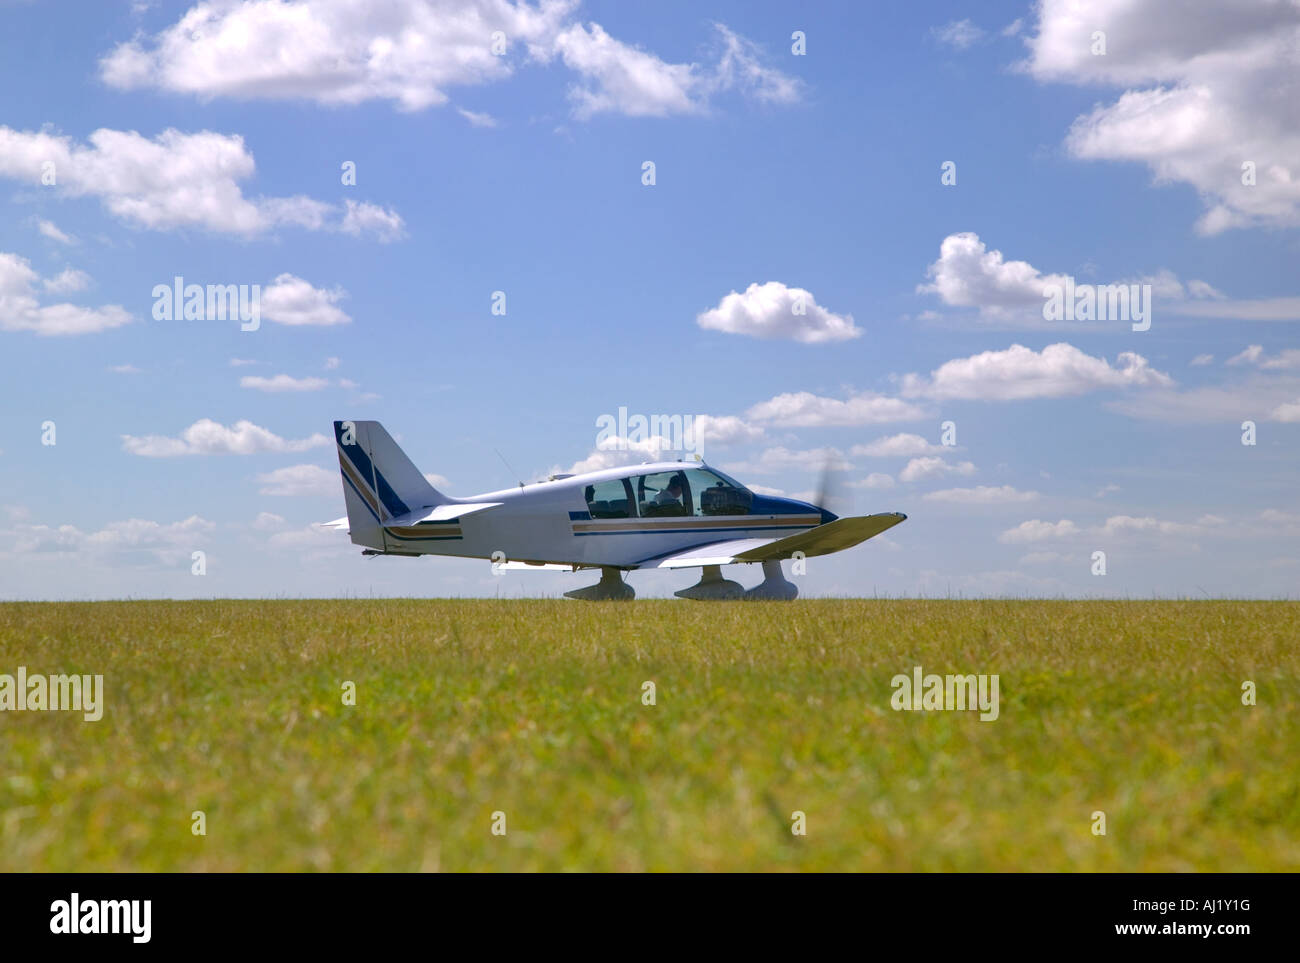 Light aircraft on a grass runway about to take off Stock Photo